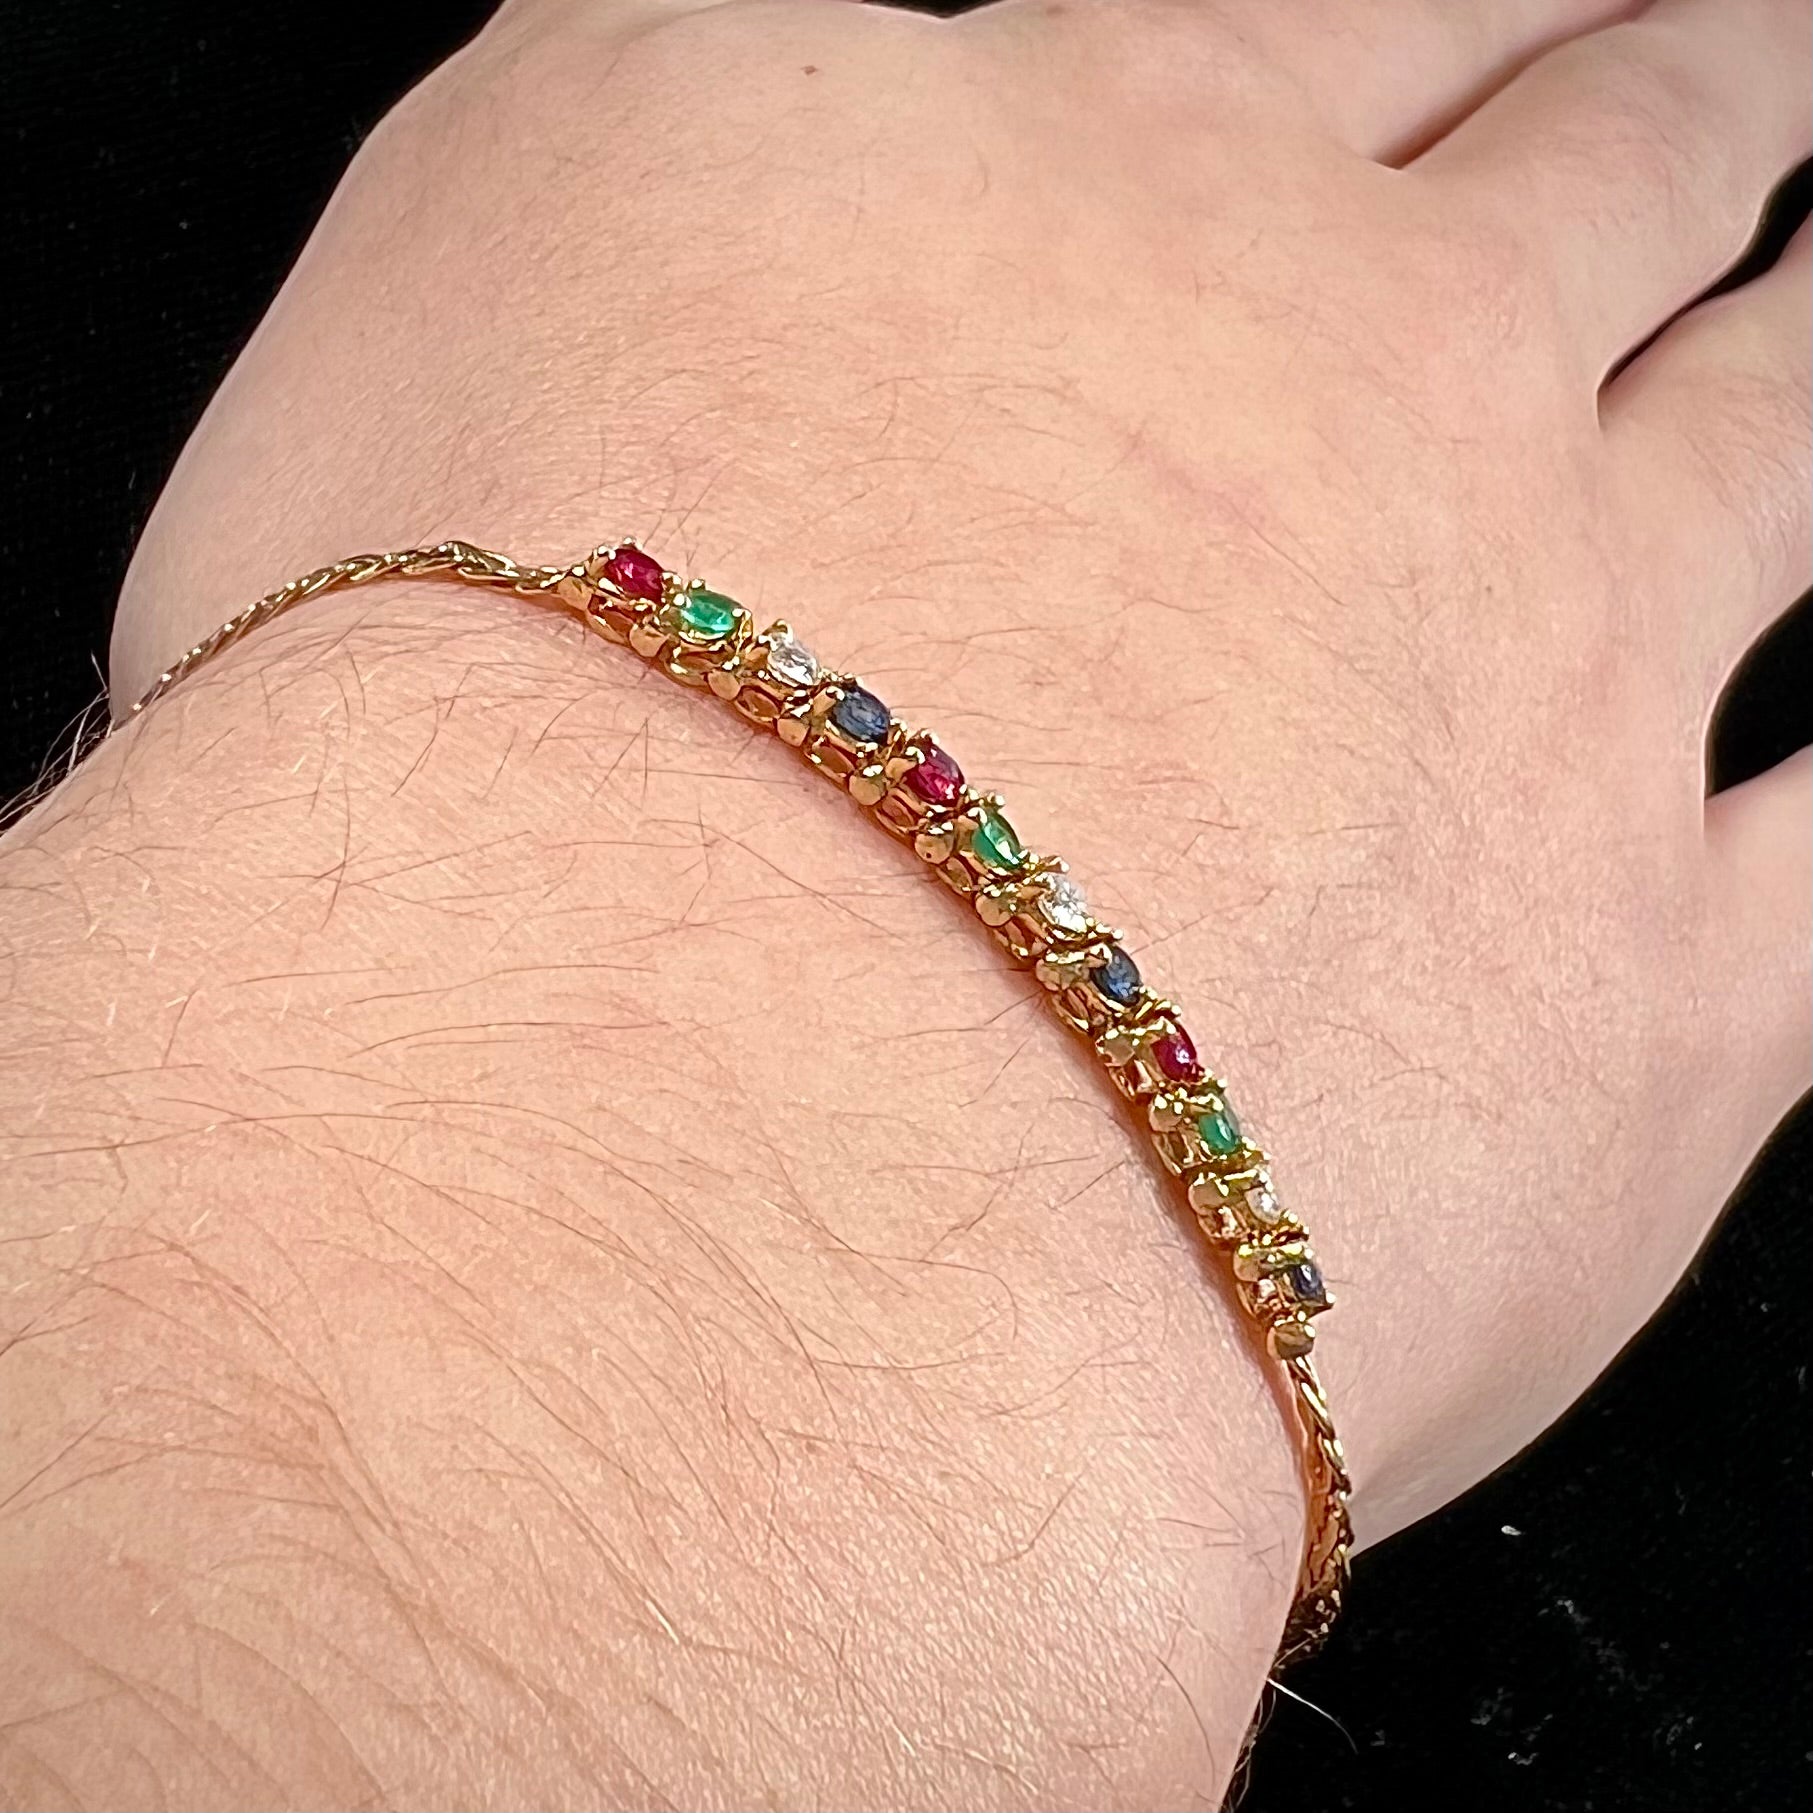 An 18k yellow gold bracelet set with natural rubies, sapphires, diamonds, and emeralds.